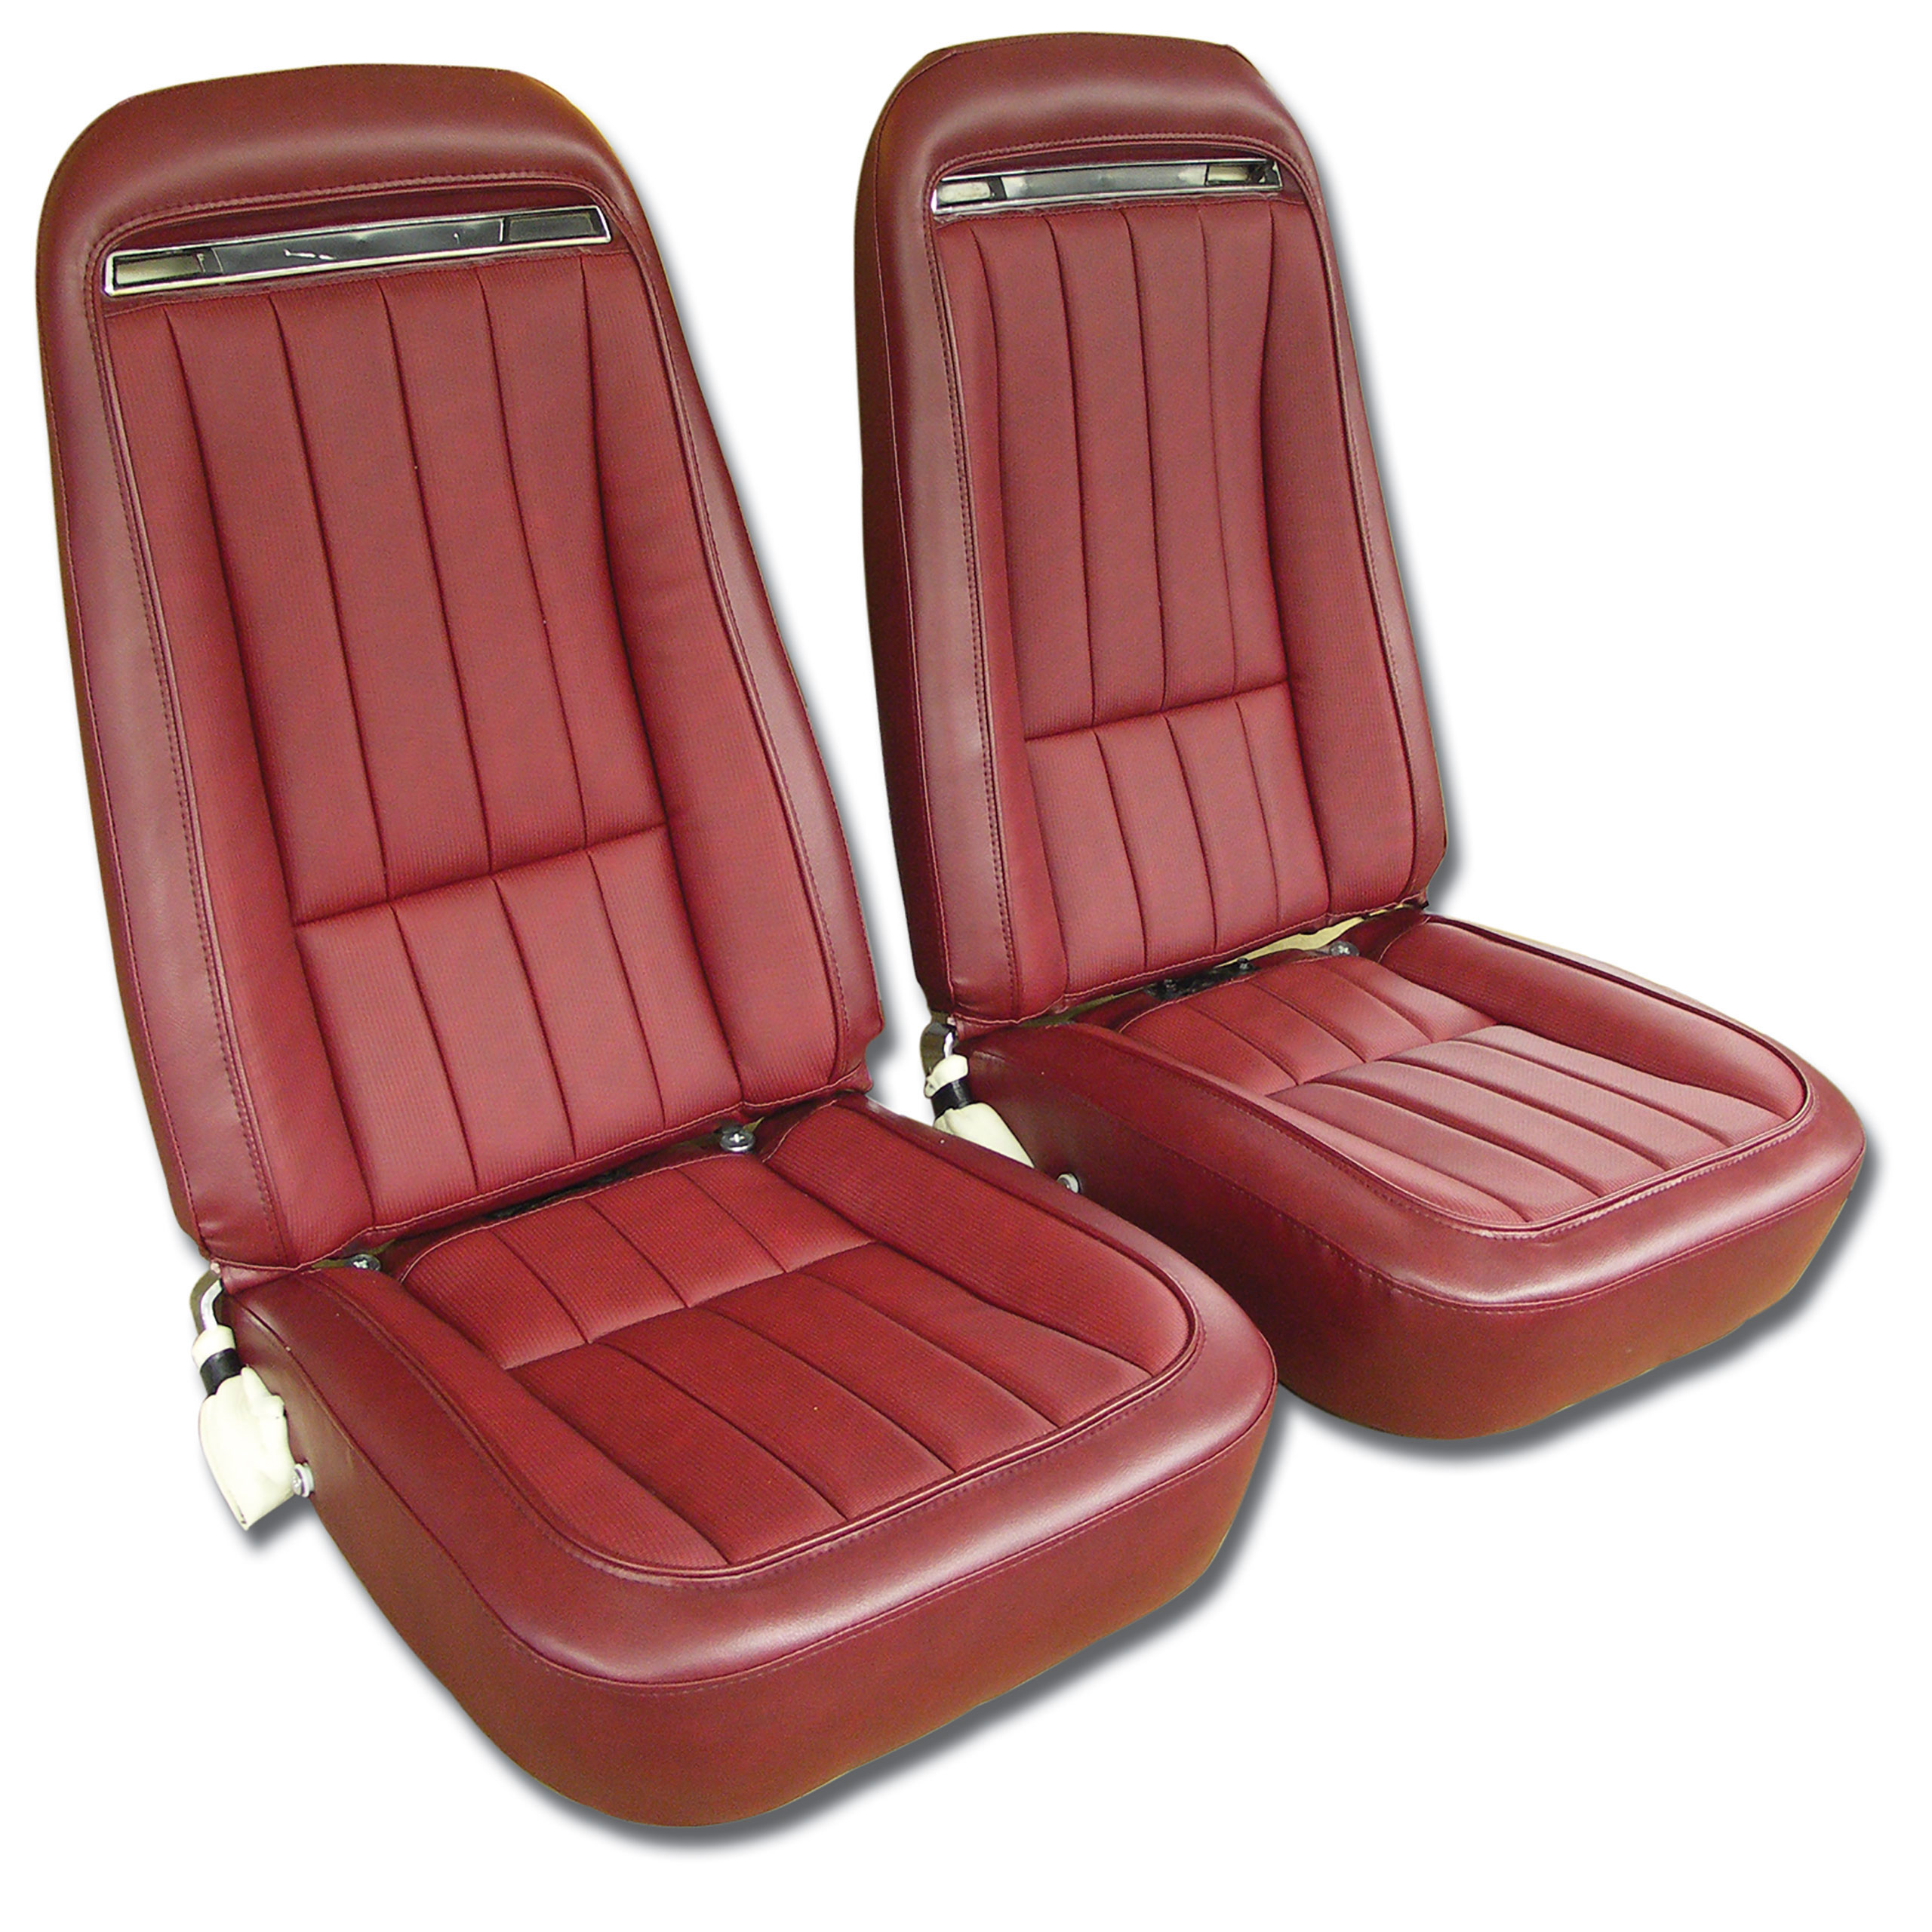 1973-1974 C3 Corvette Mounted Seats Oxblood "Leather-Like" Vinyl Without Shoulder Harness